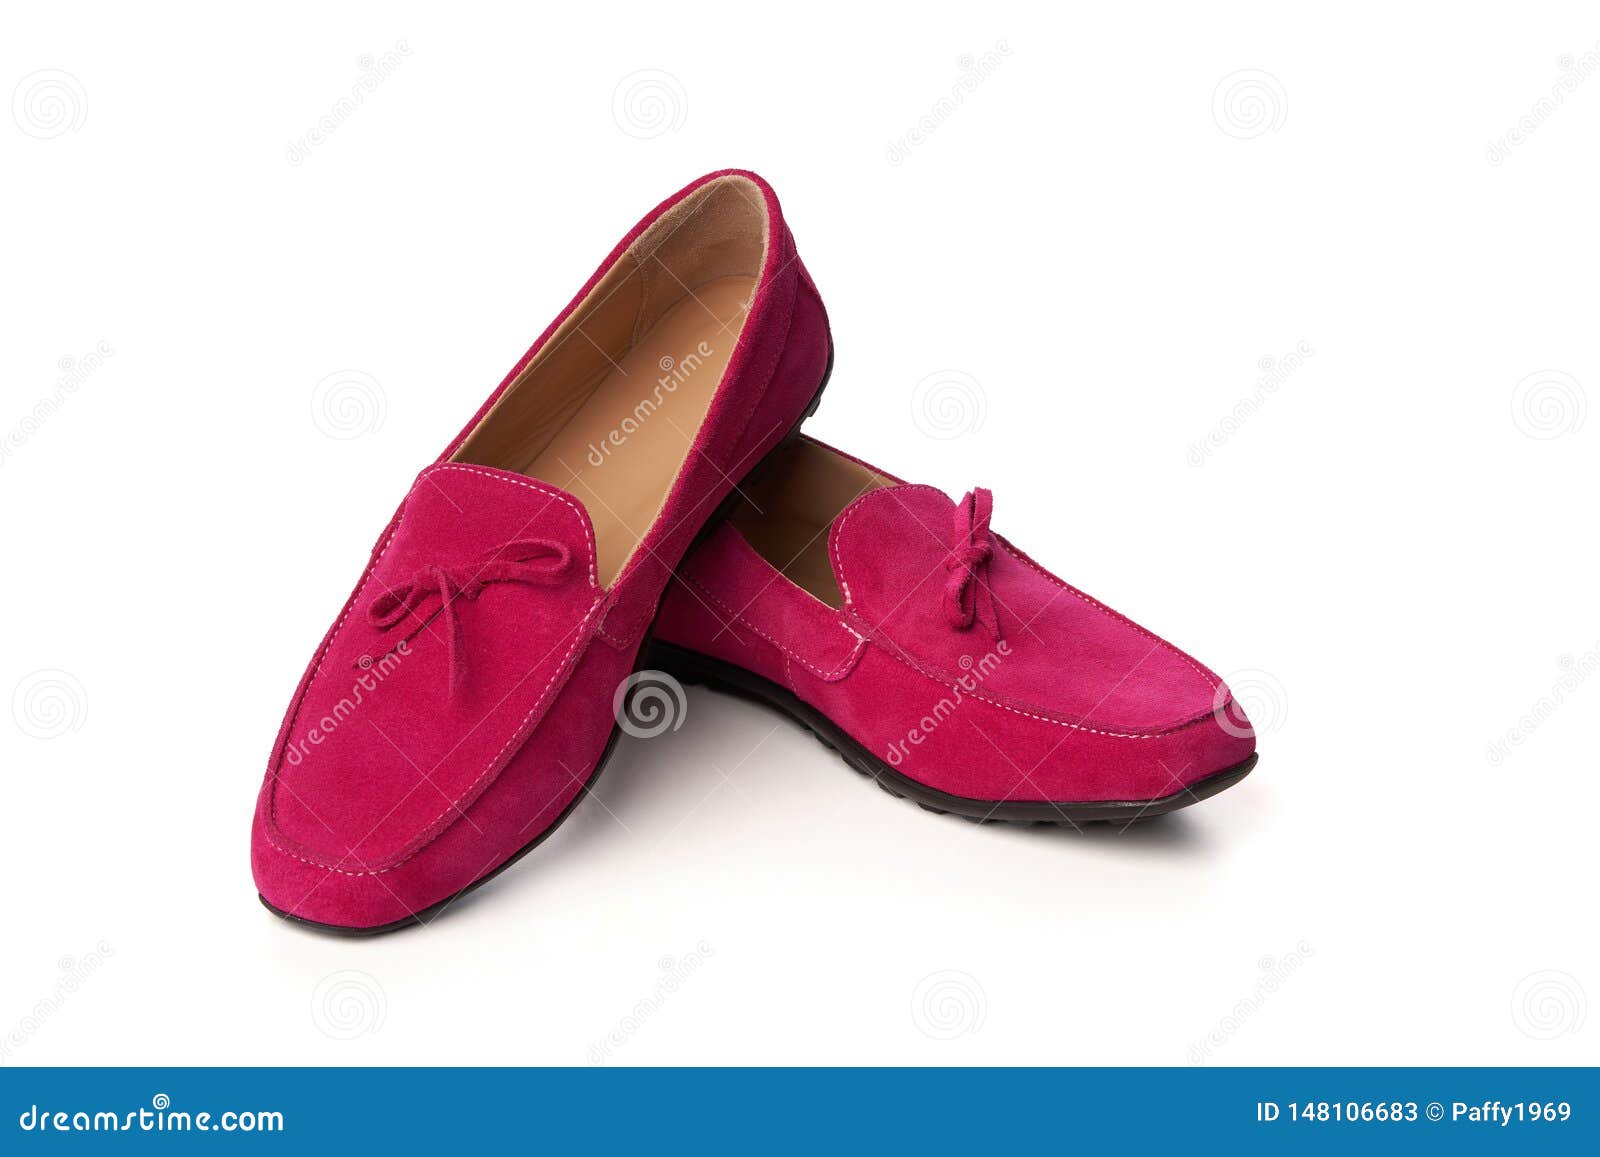 Pink Suede Woman`s Moccasins Shoes Stock Image - Image of people ...